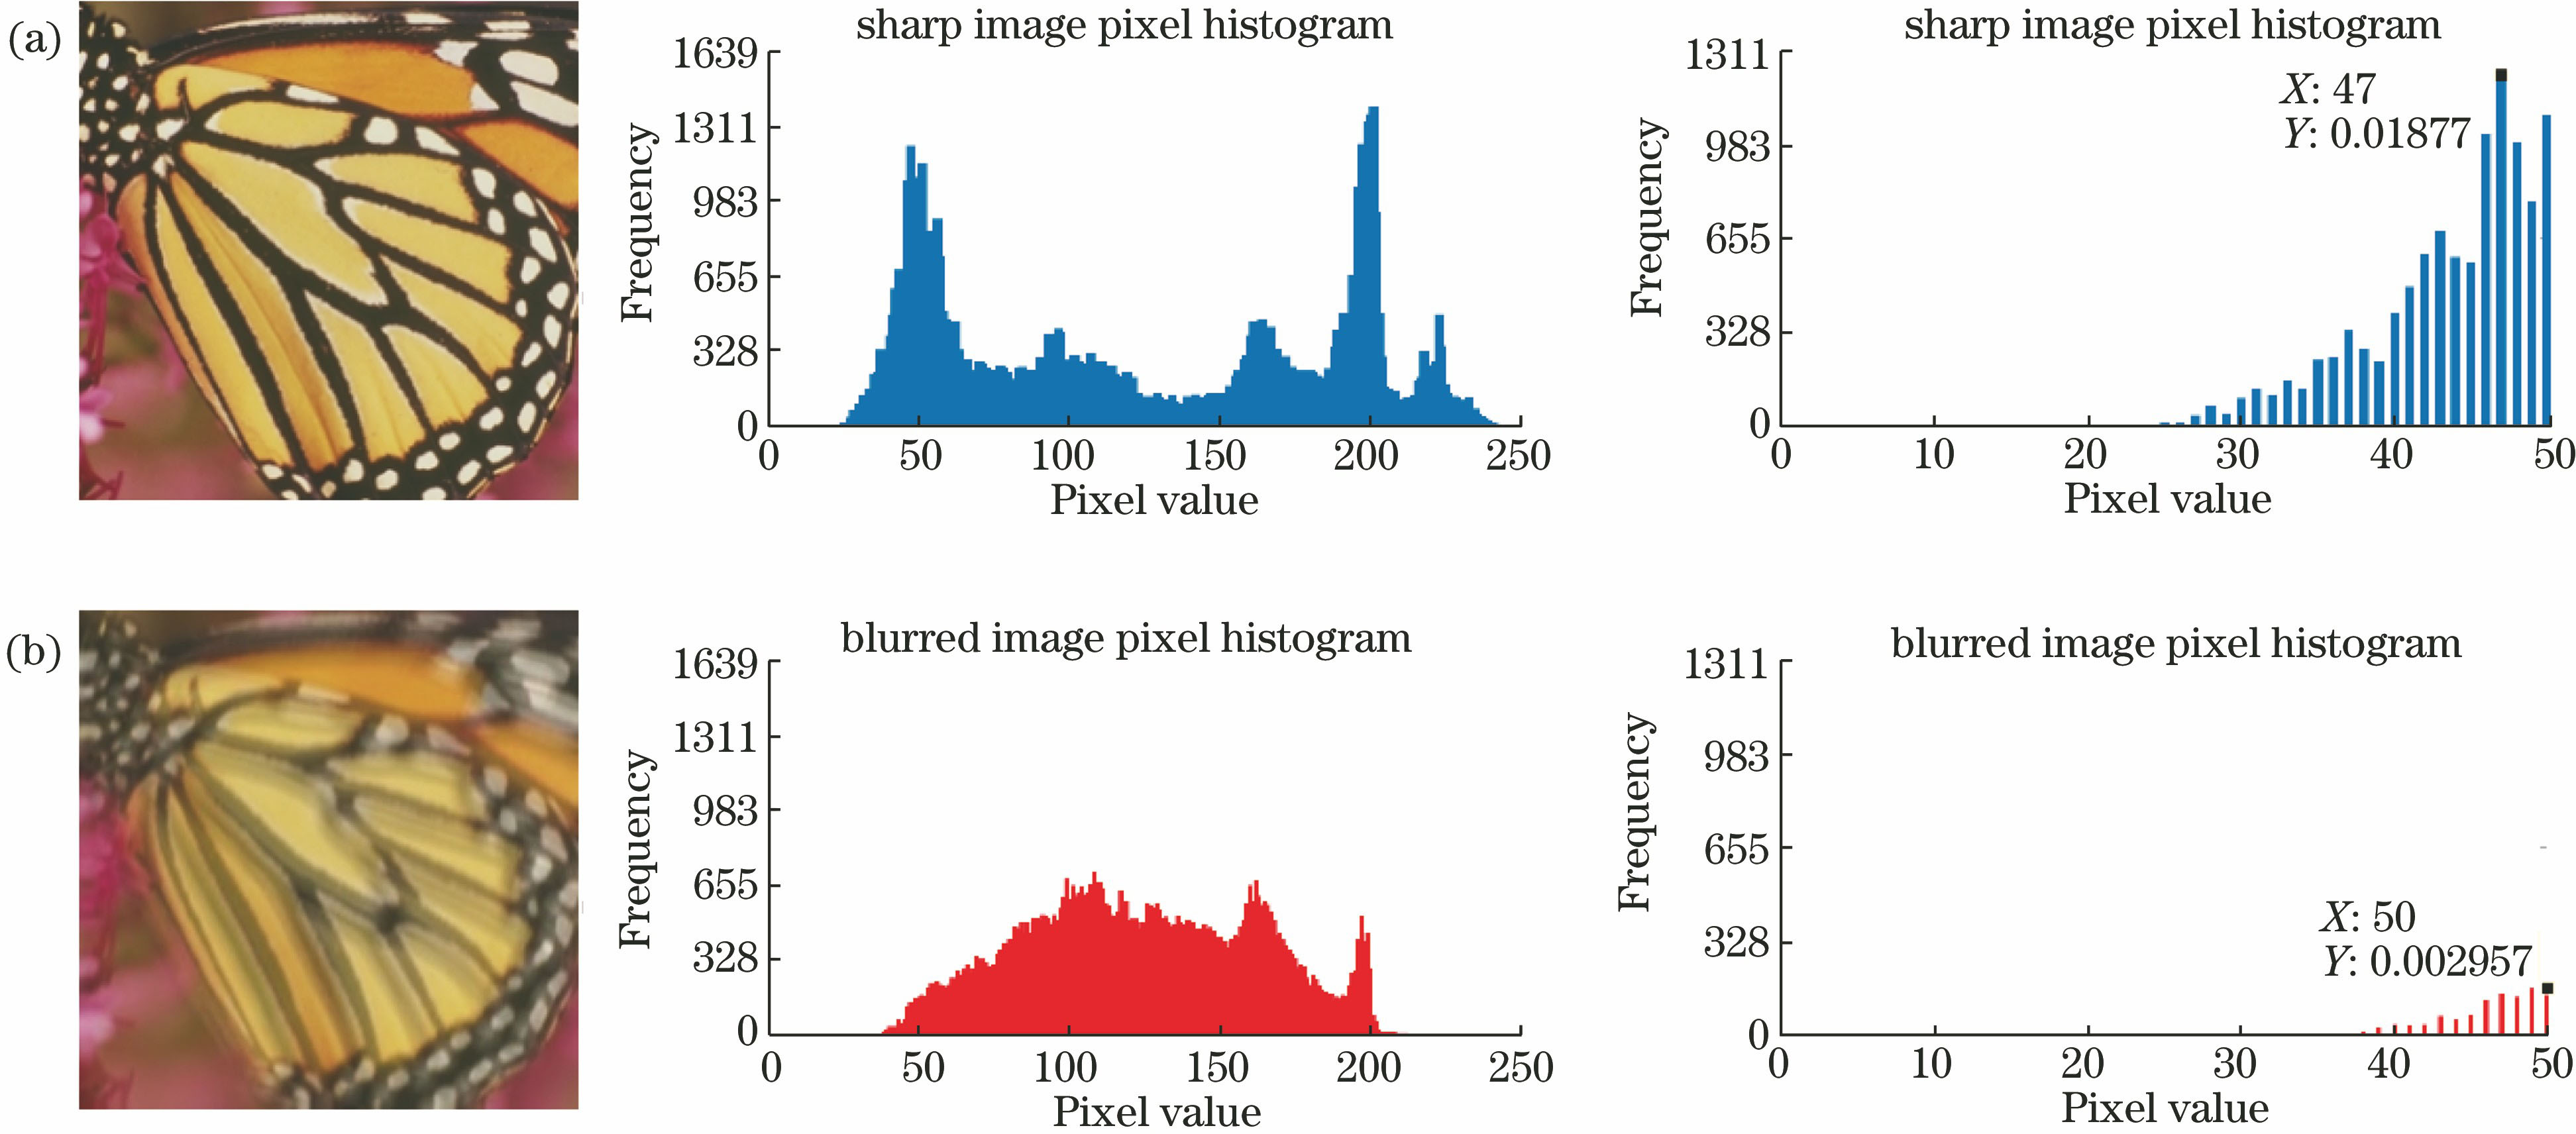 Pixel gray histograms of (a) clear image and (b) blurred image